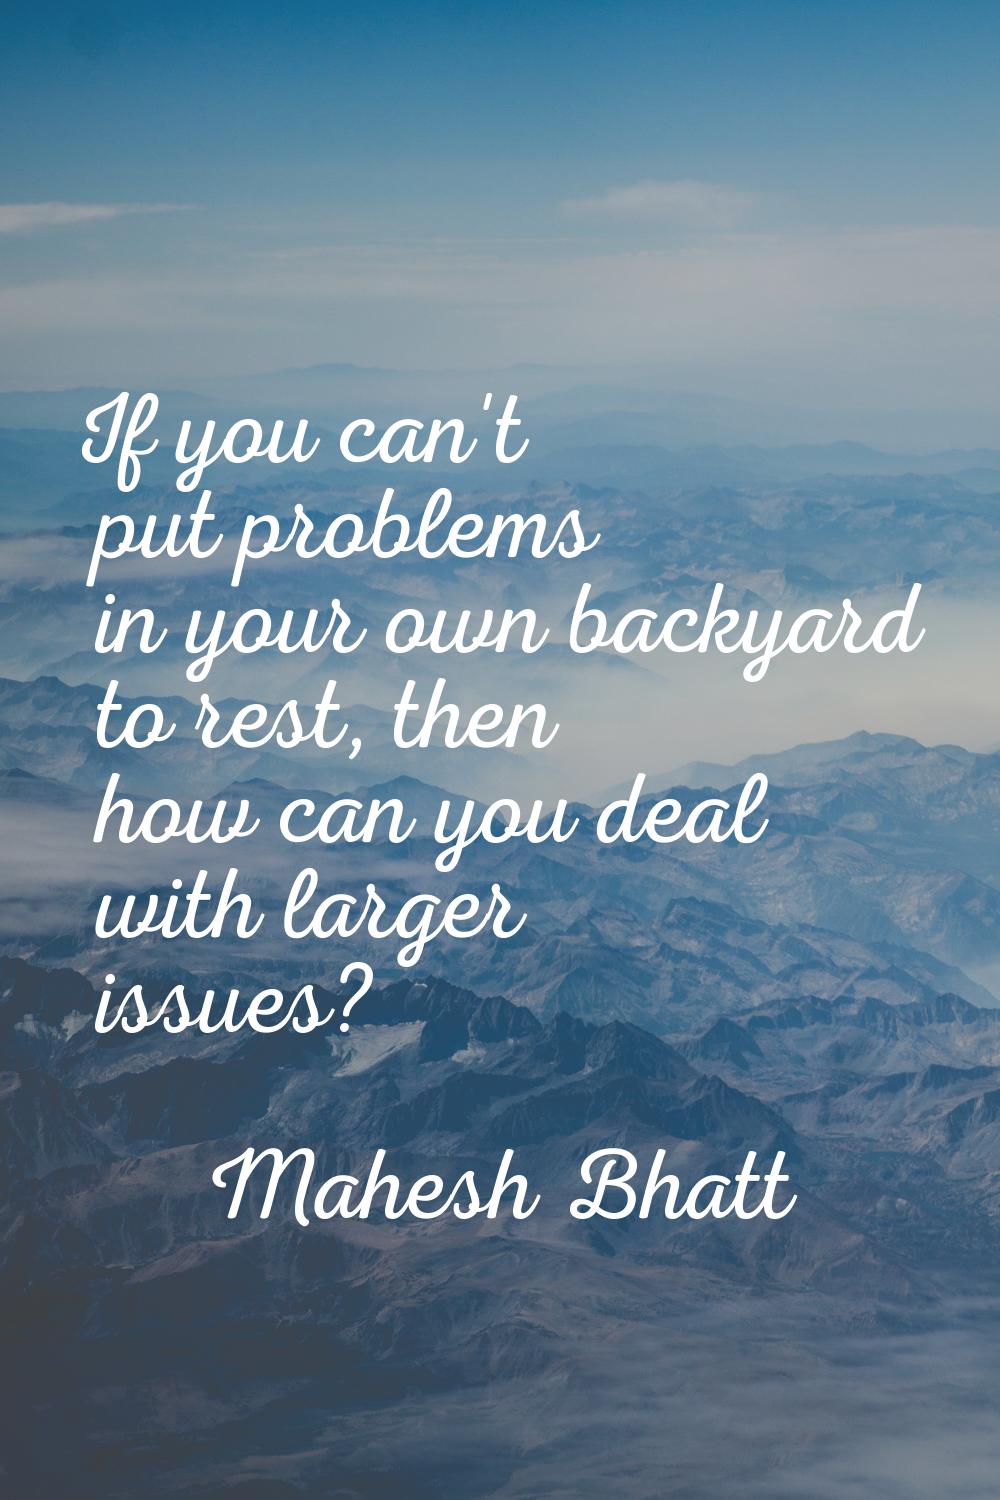 If you can't put problems in your own backyard to rest, then how can you deal with larger issues?